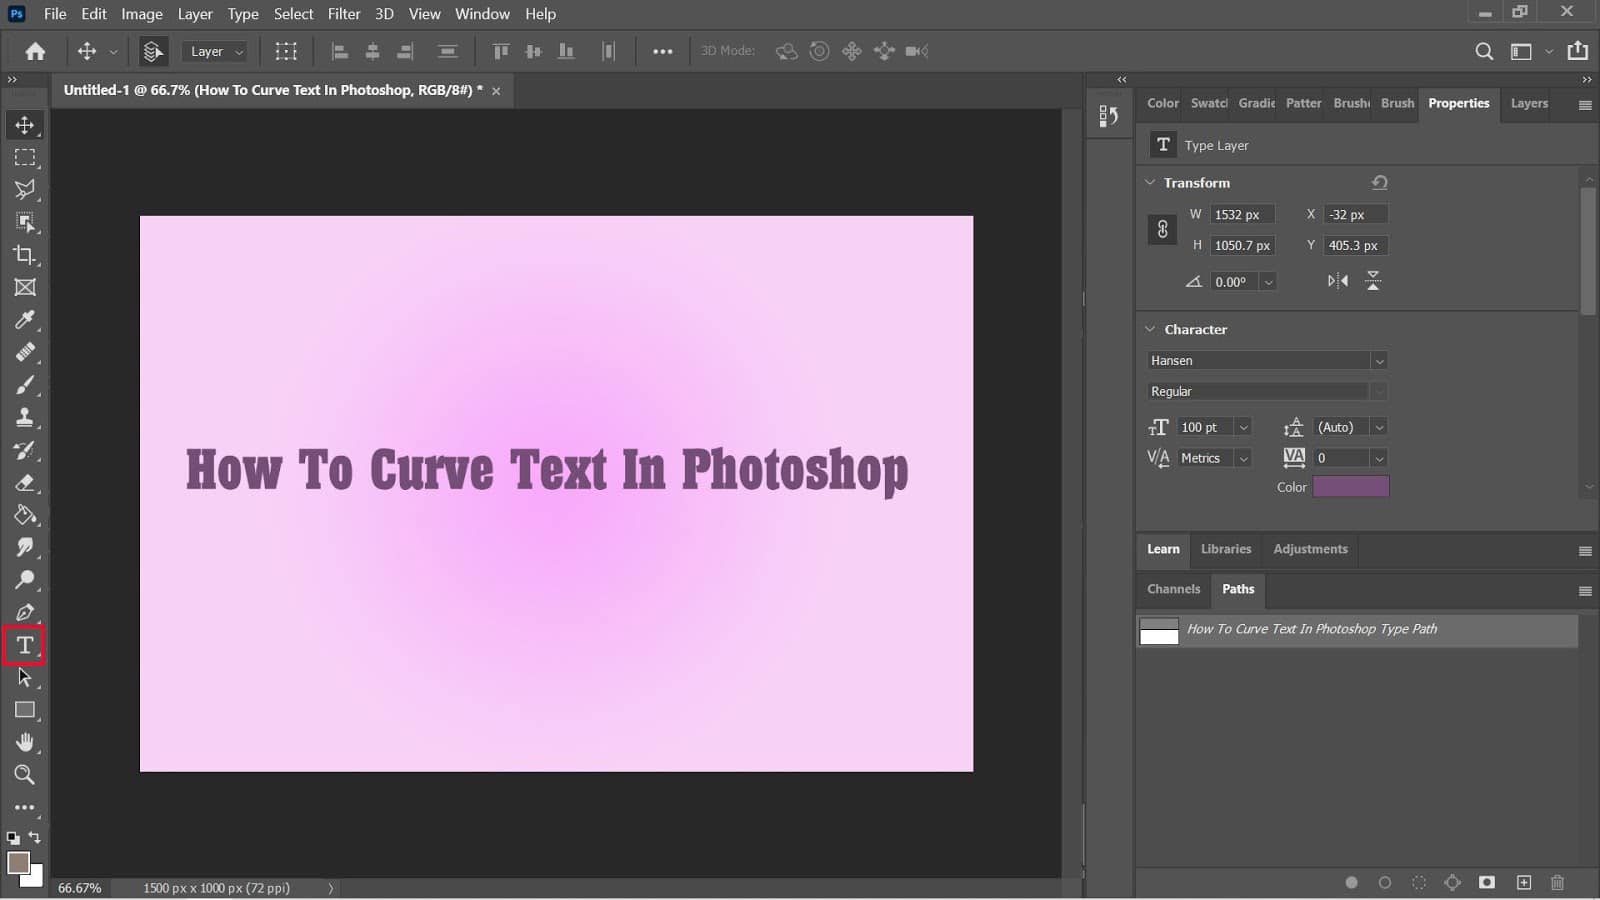 Create A New Text in photoshop